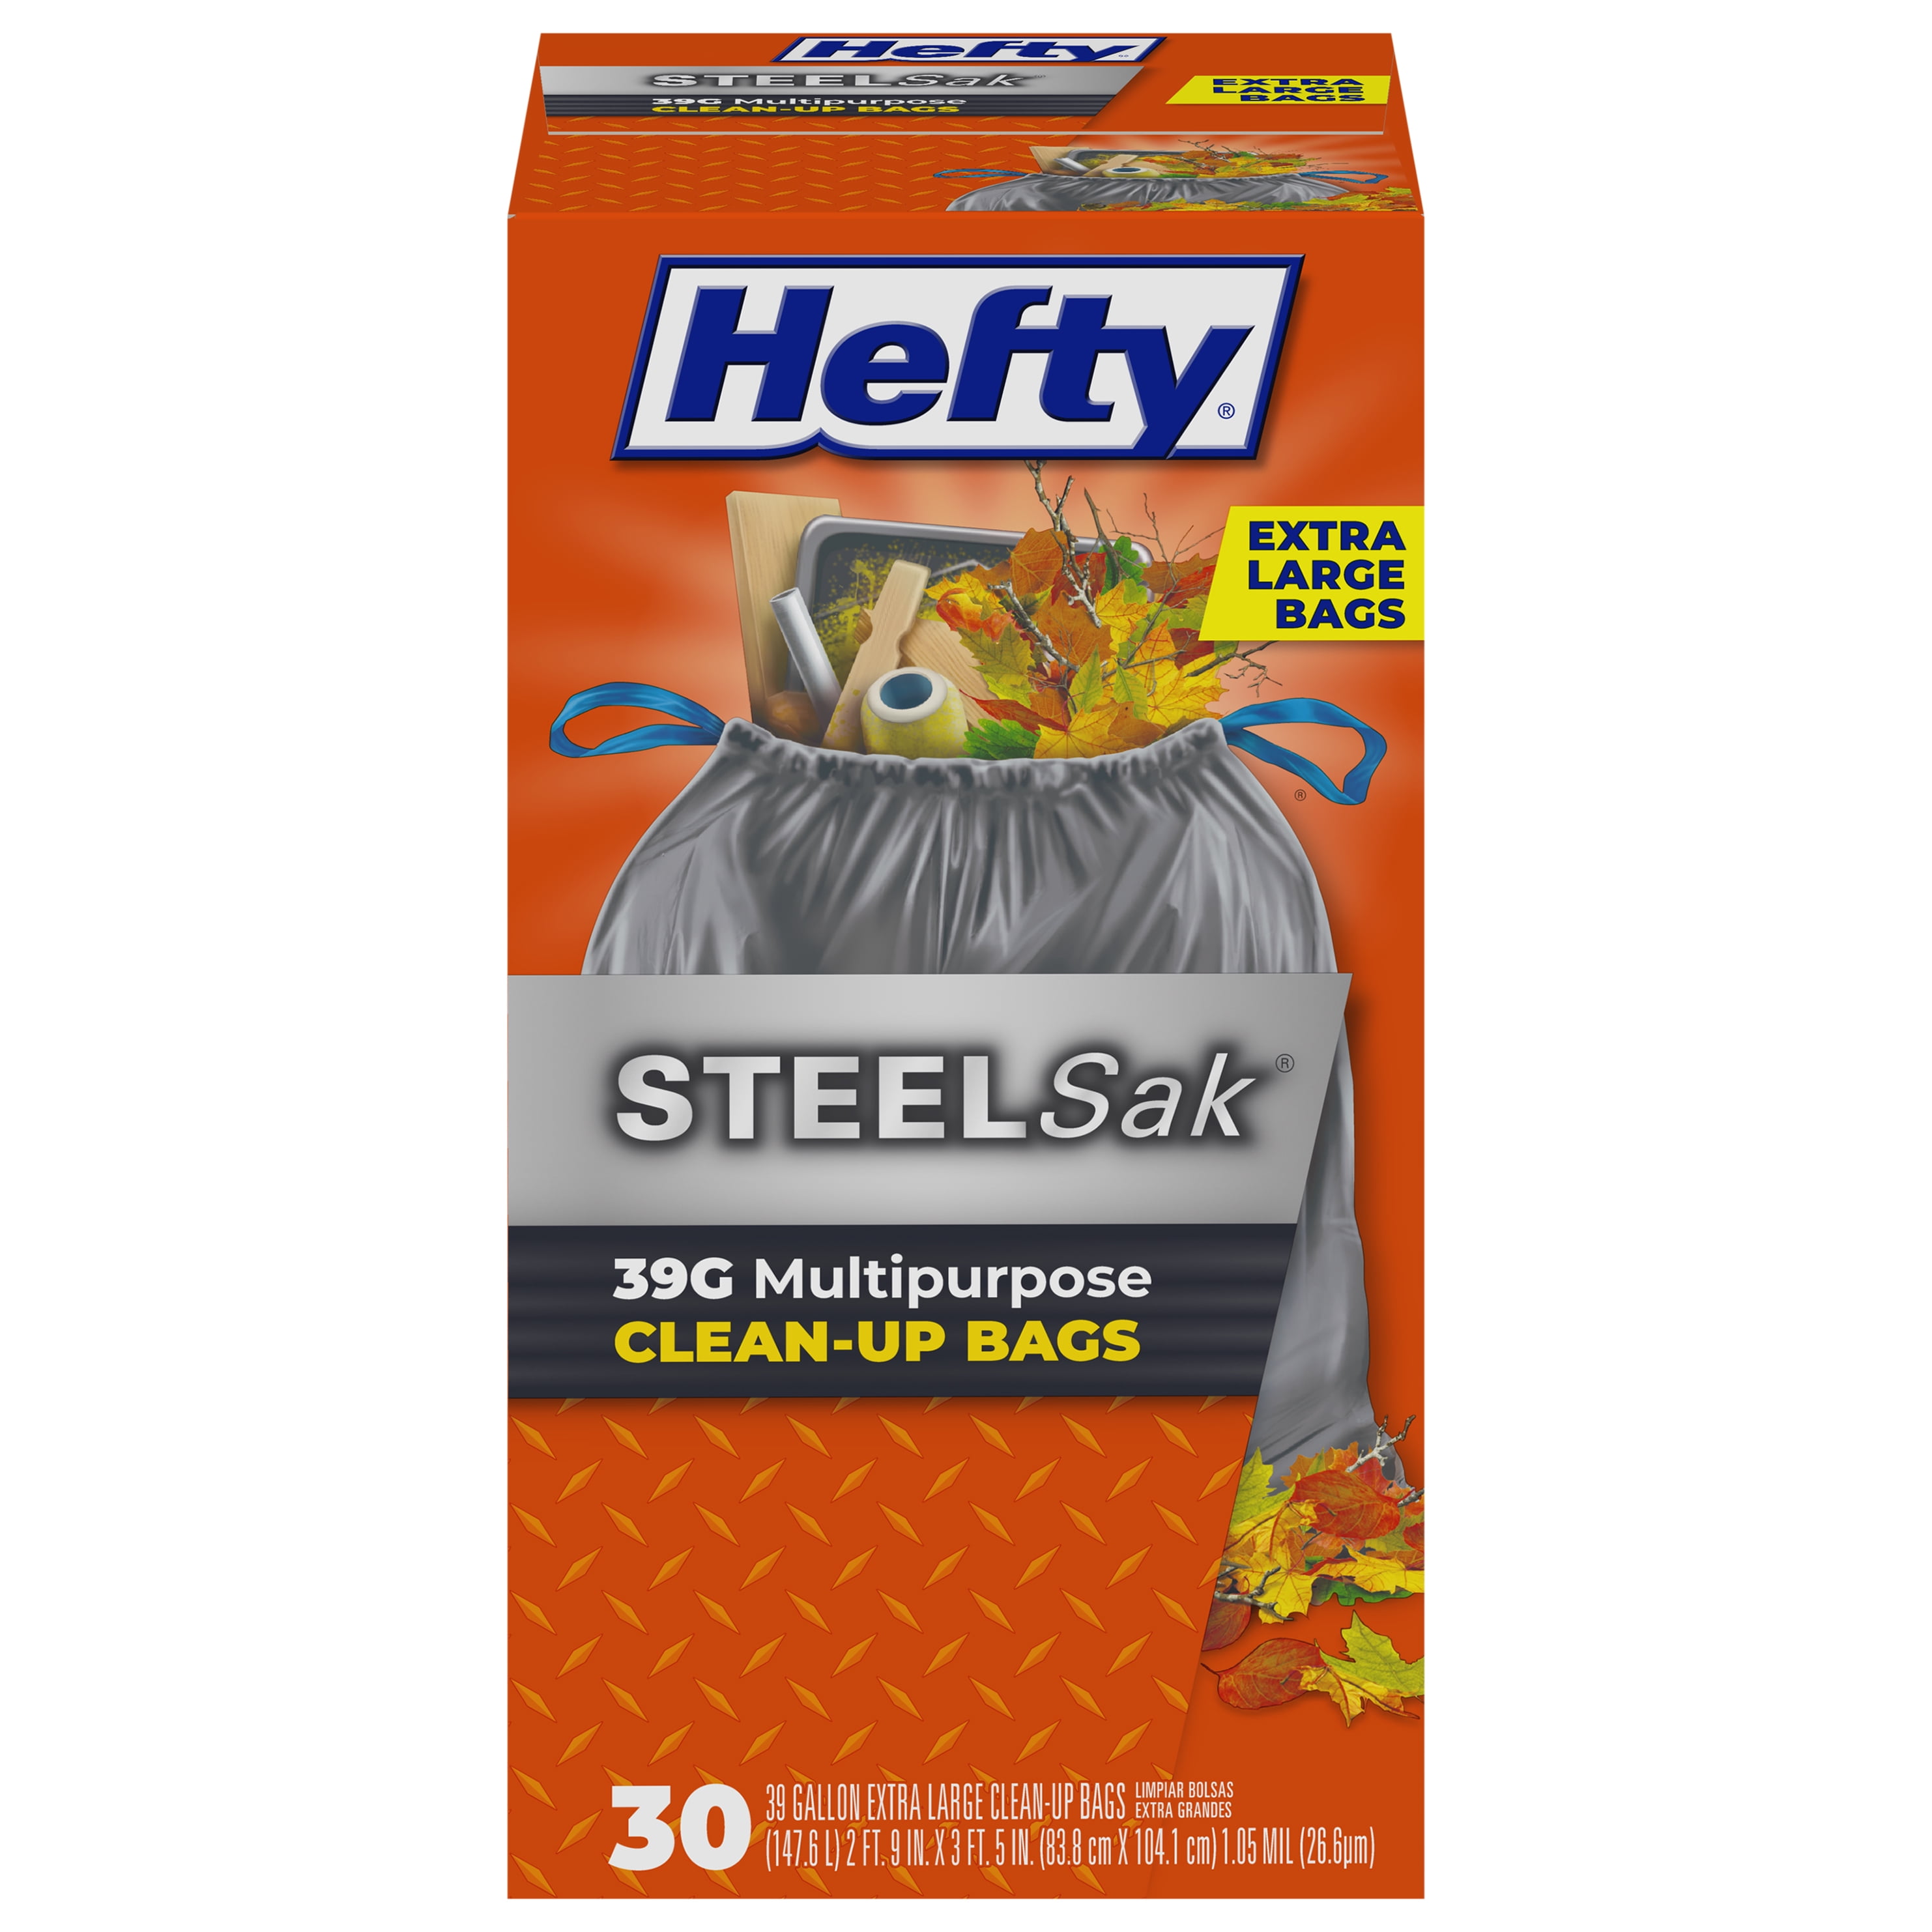 Amazon.com: Hefty Made to Fit Trash Bags, Fits simplehuman Size H (9  Gallons), 100 Count (5 Pouches of 20 Bags Each) - Packaging May Vary :  Health & Household